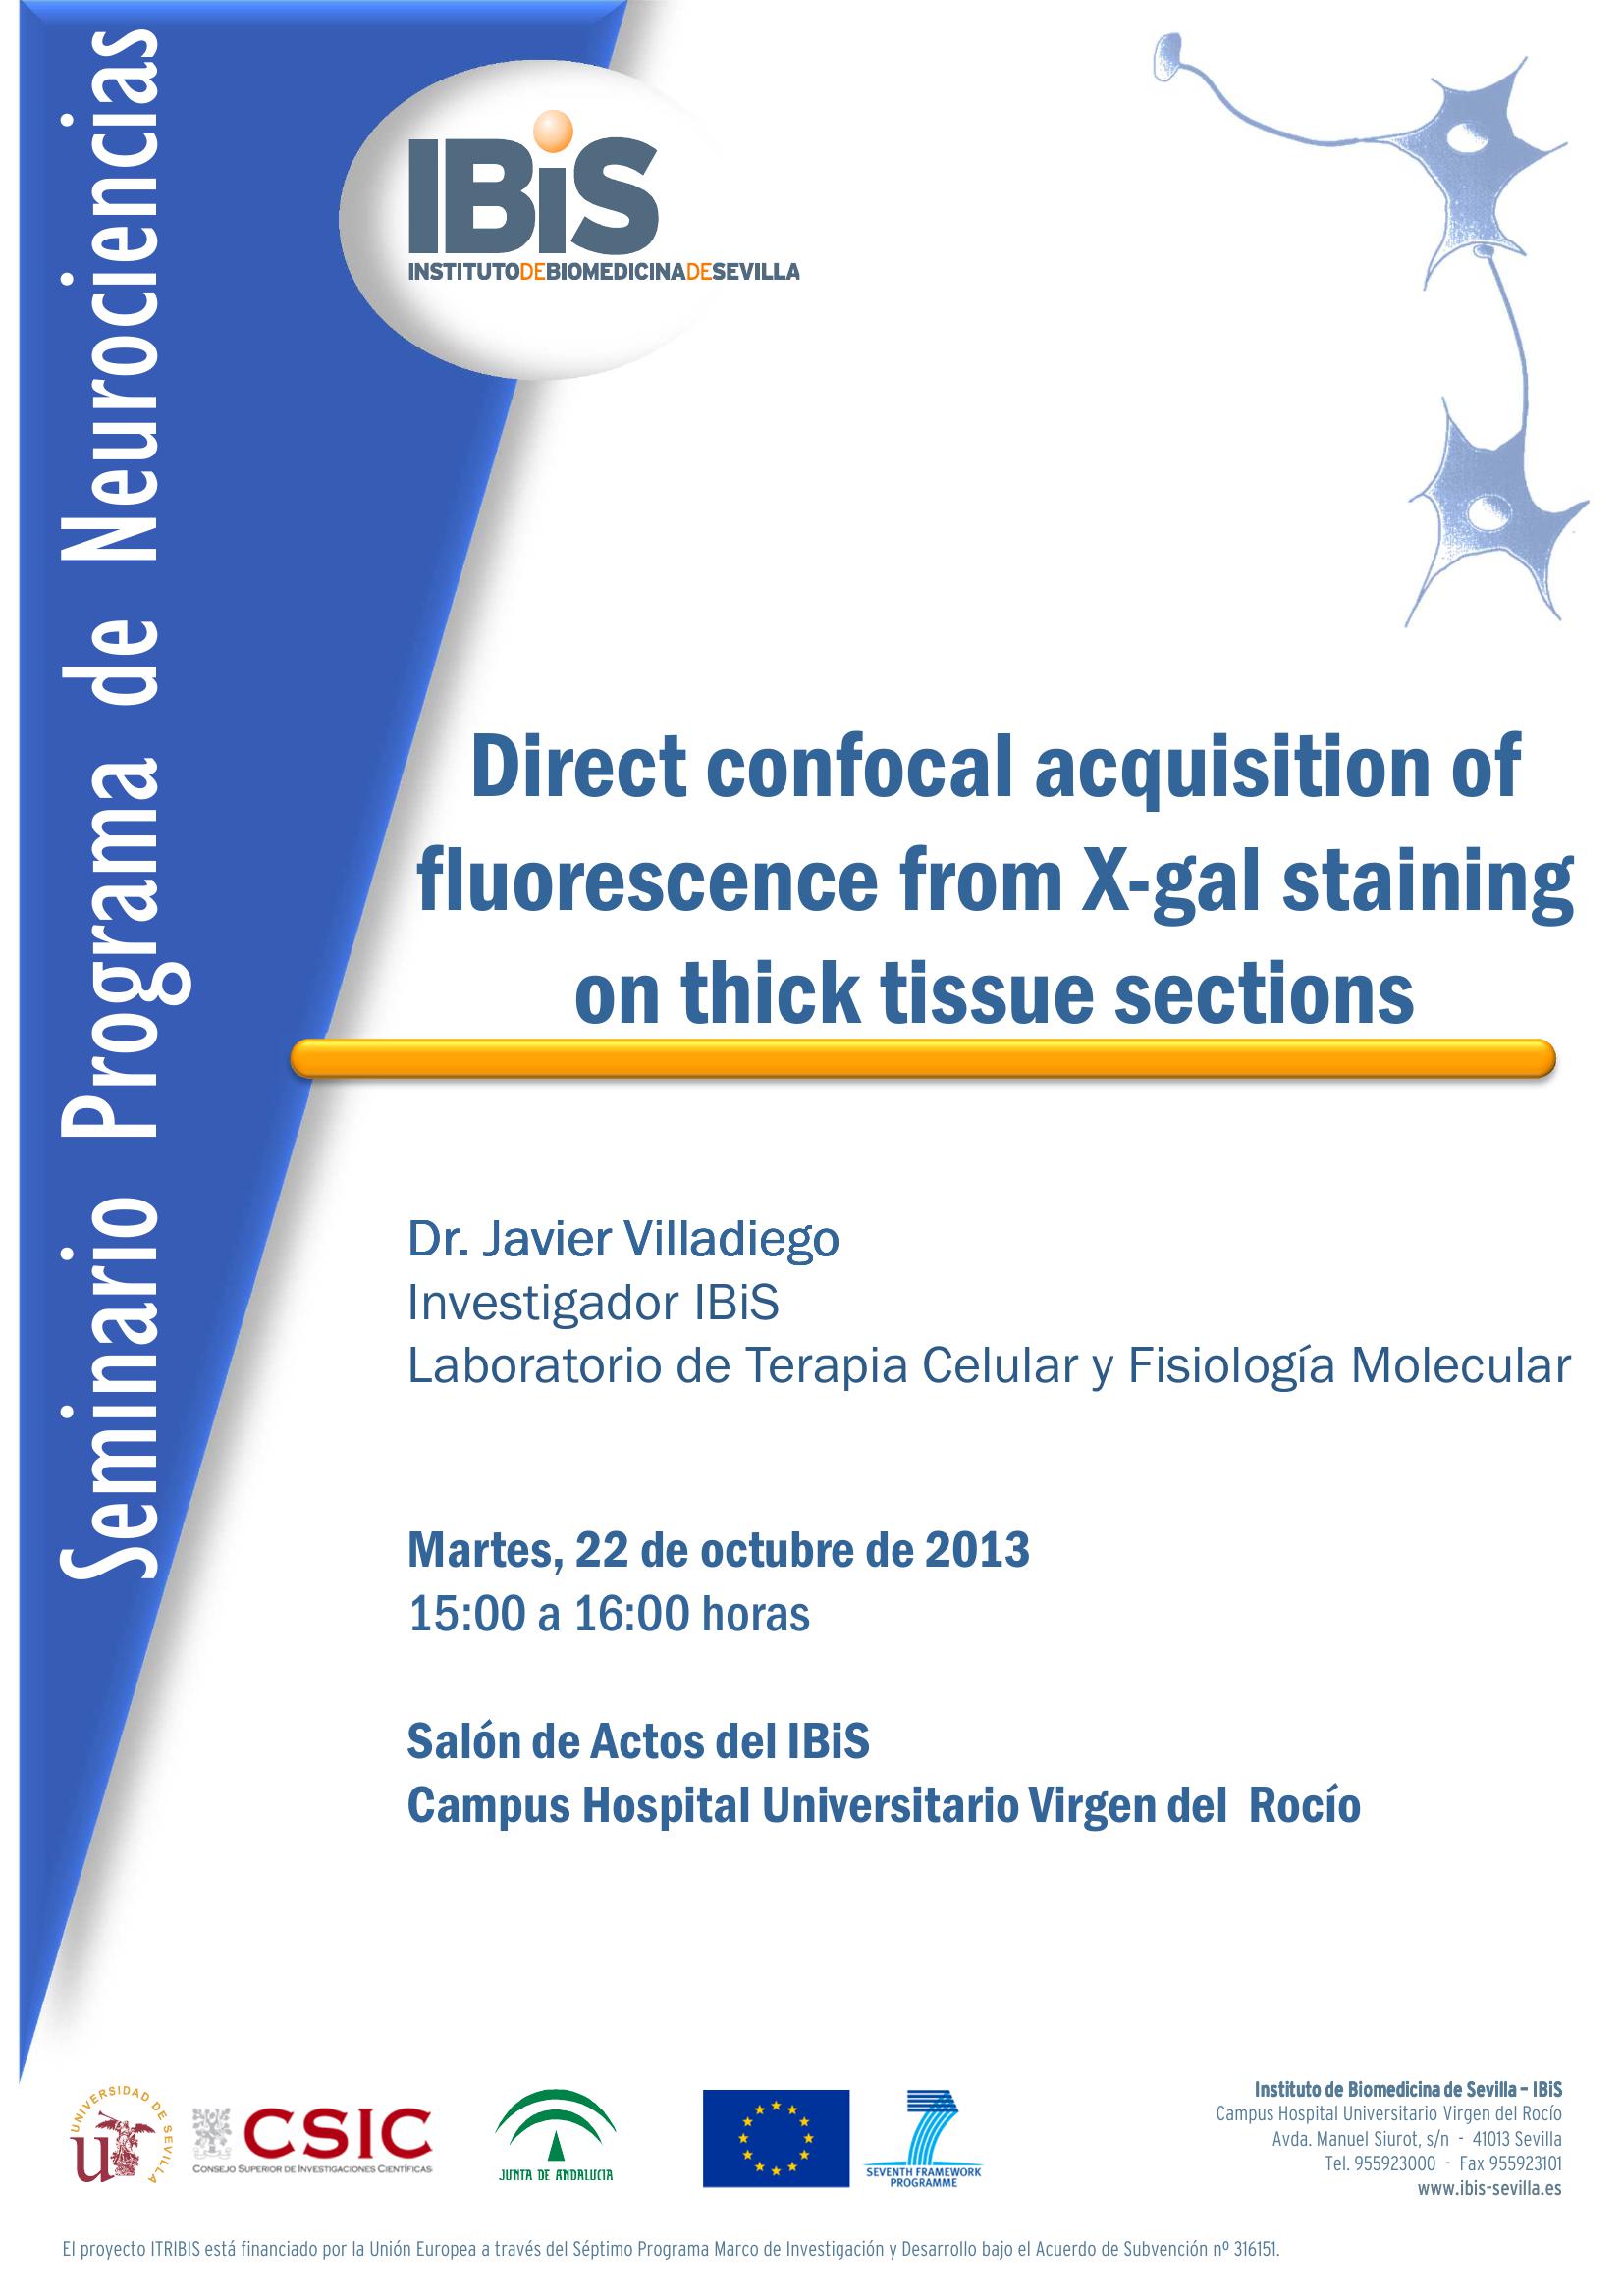 Poster: Direct confocal acquisition of fluorescence from X-gal staining on thick tissue sections